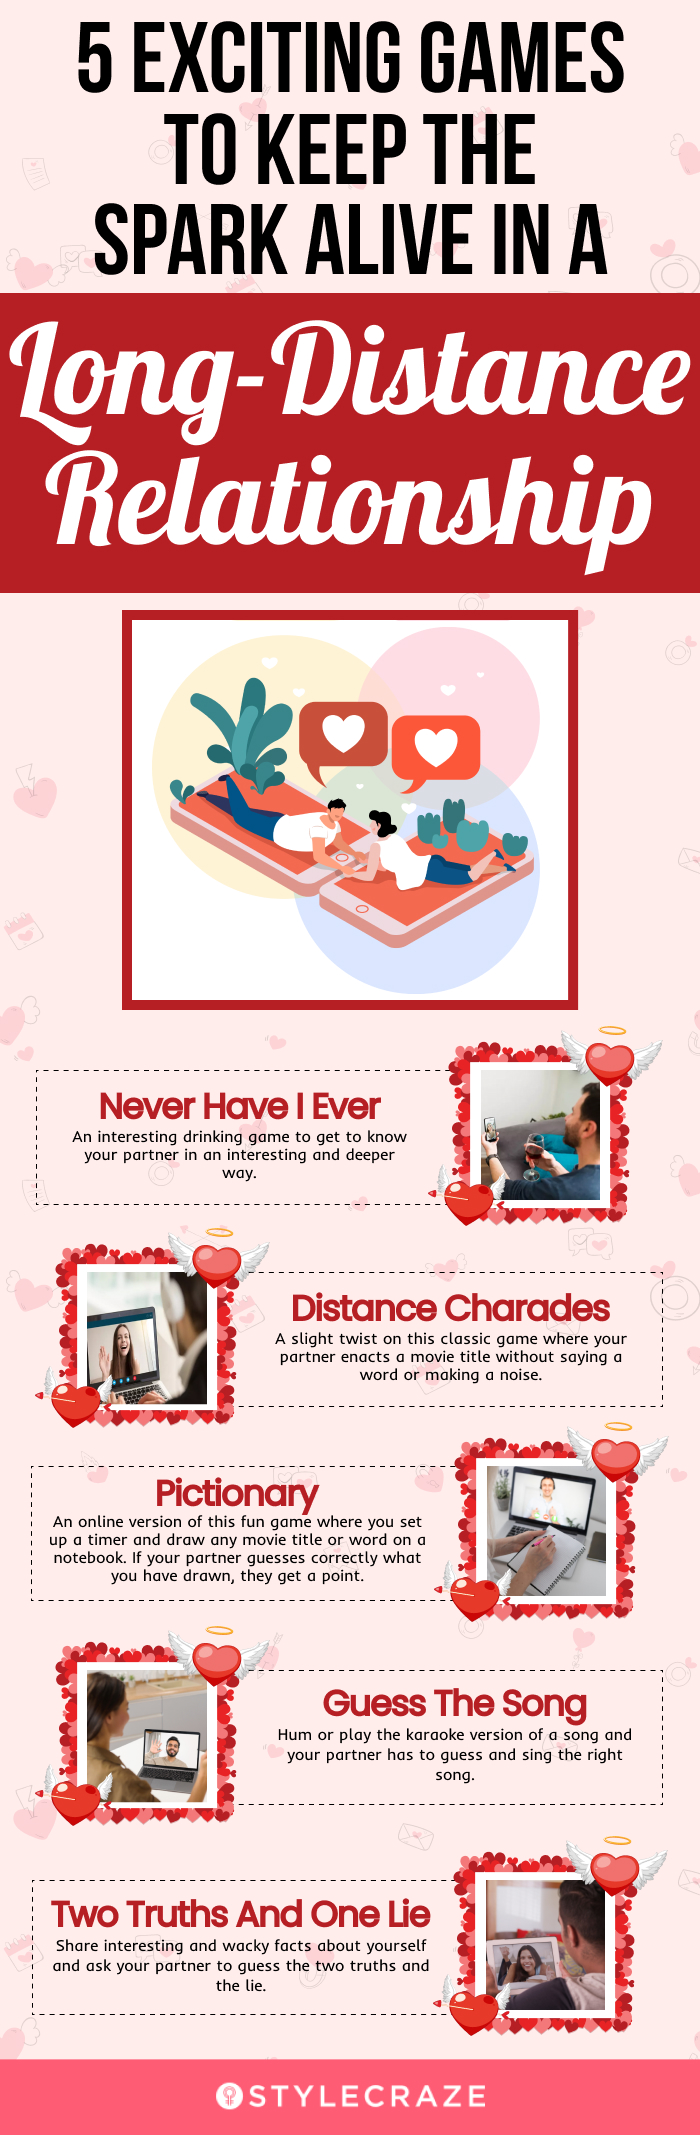 5 exciting games to keep the spark alive in a longdistance relationship [infographic]